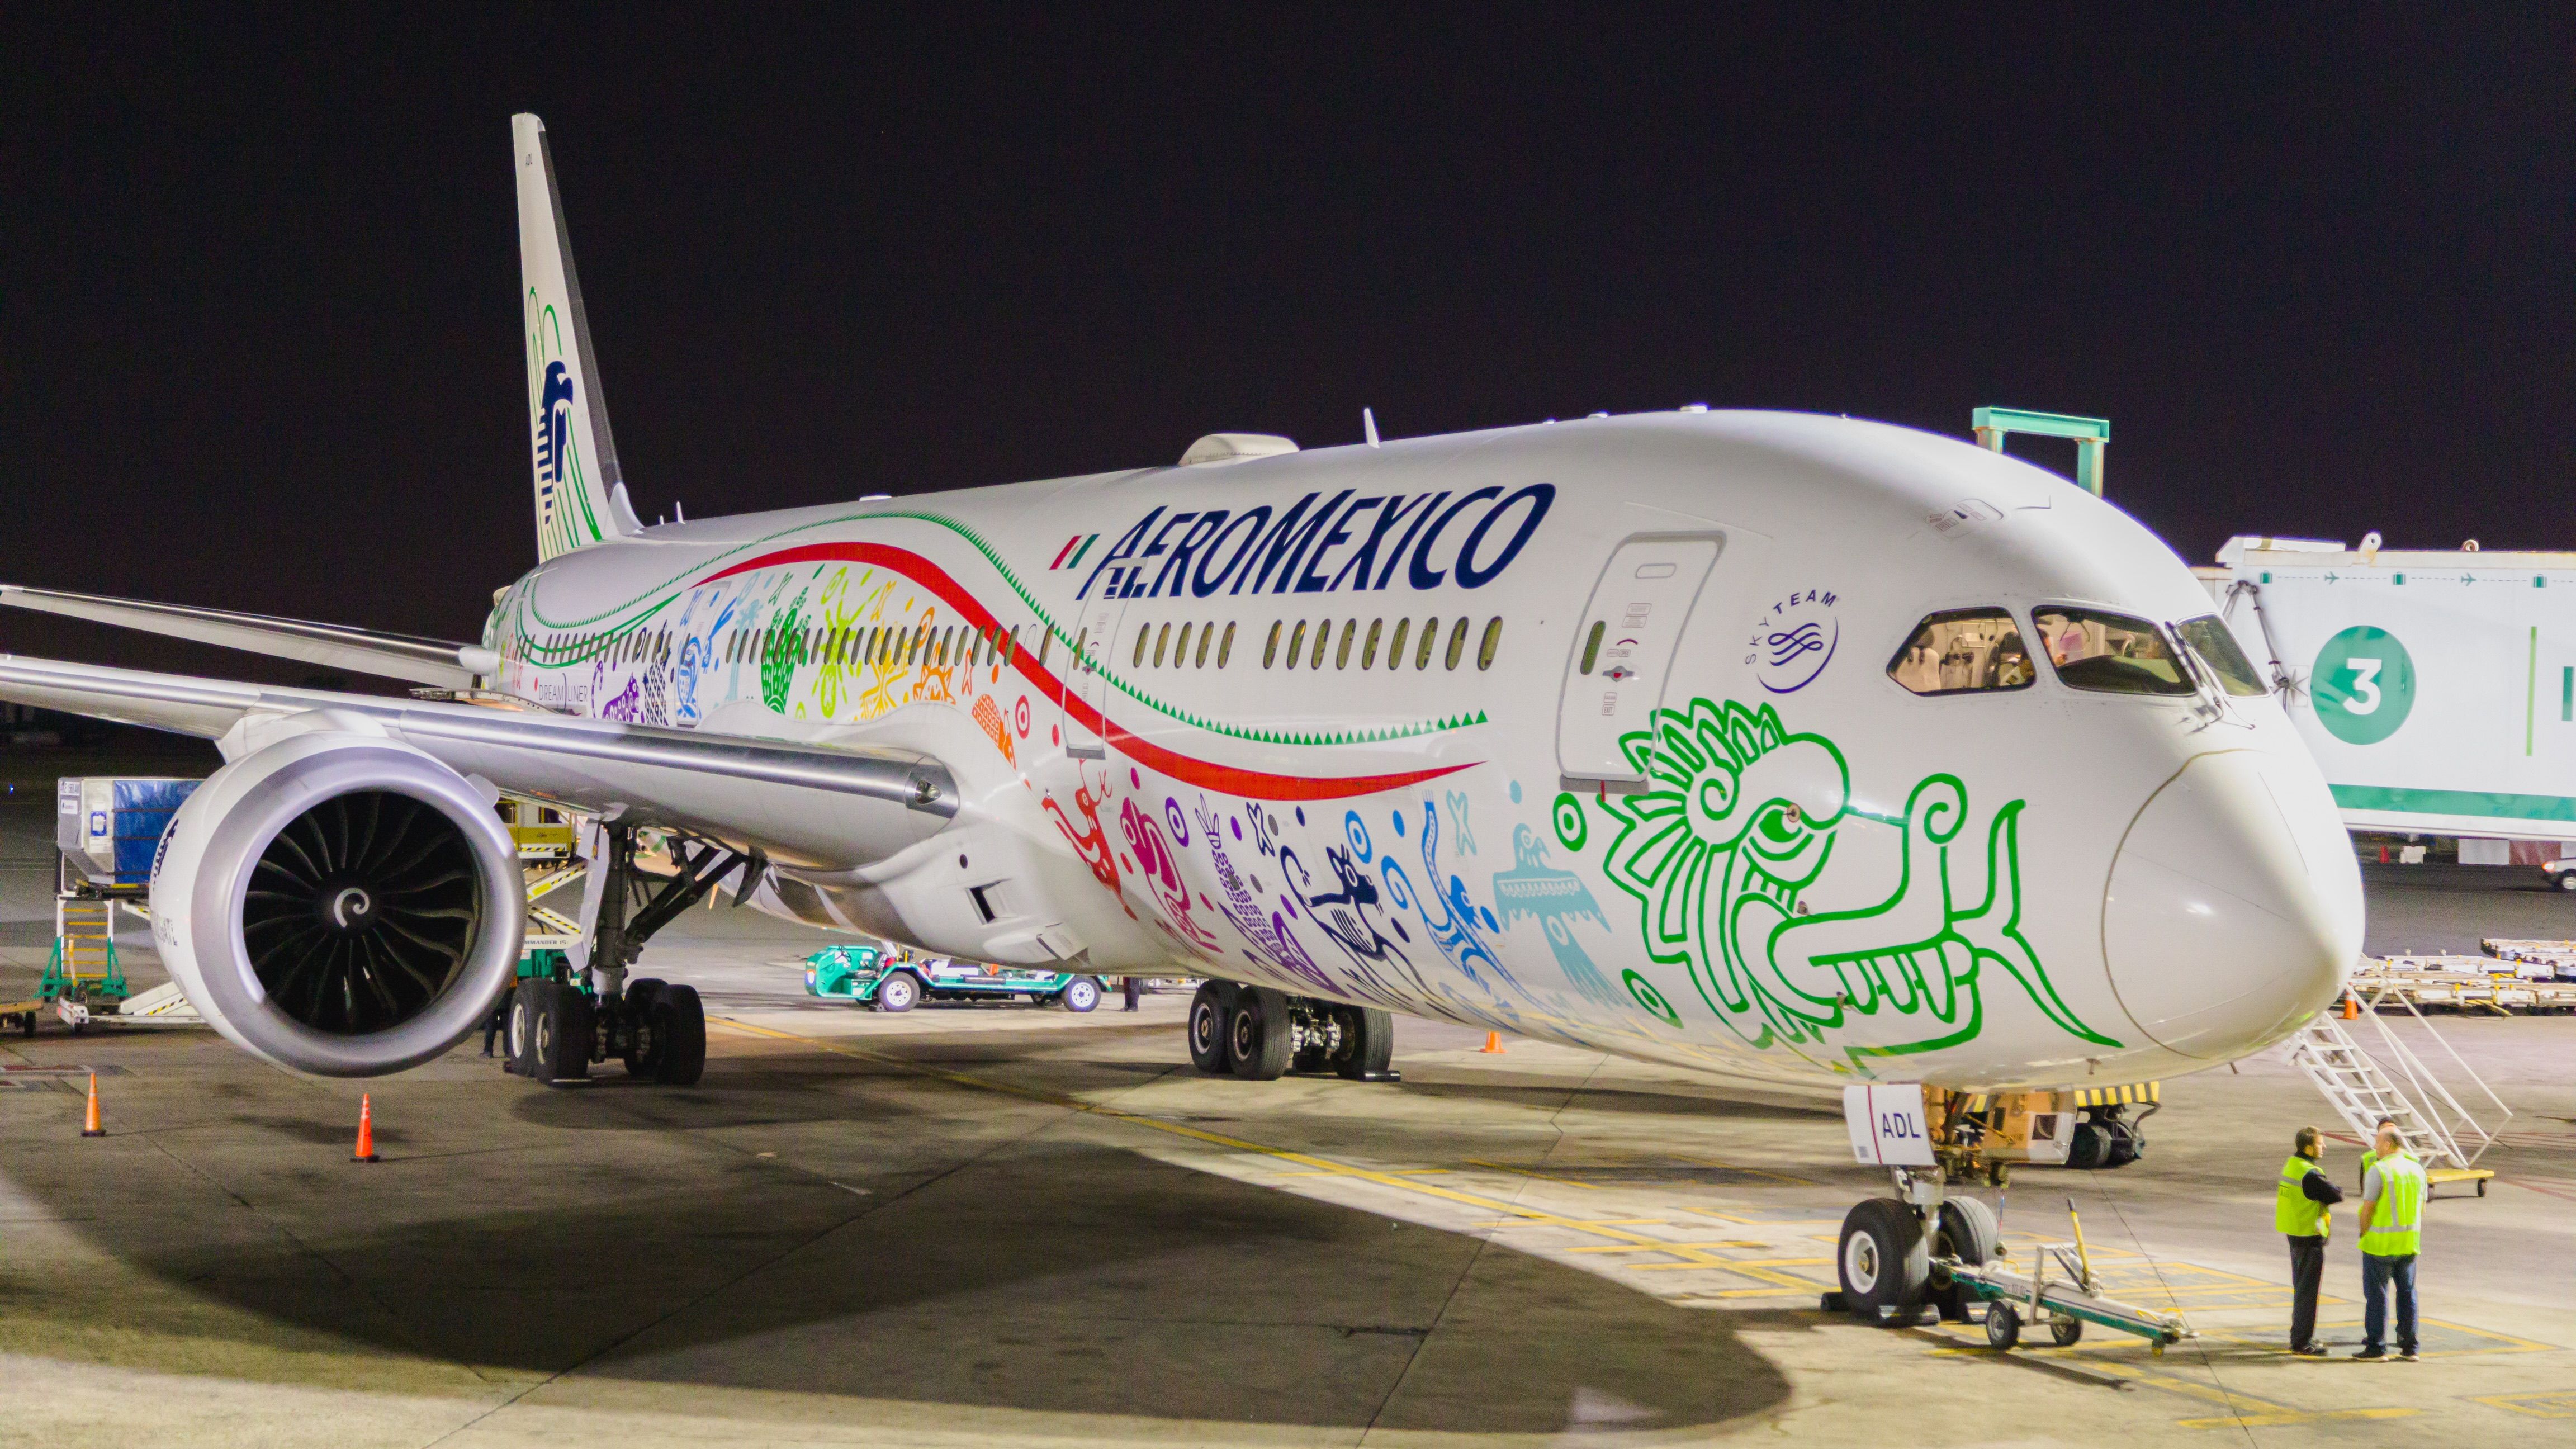 An Aeromexico Boeing 787 parked at an airport.